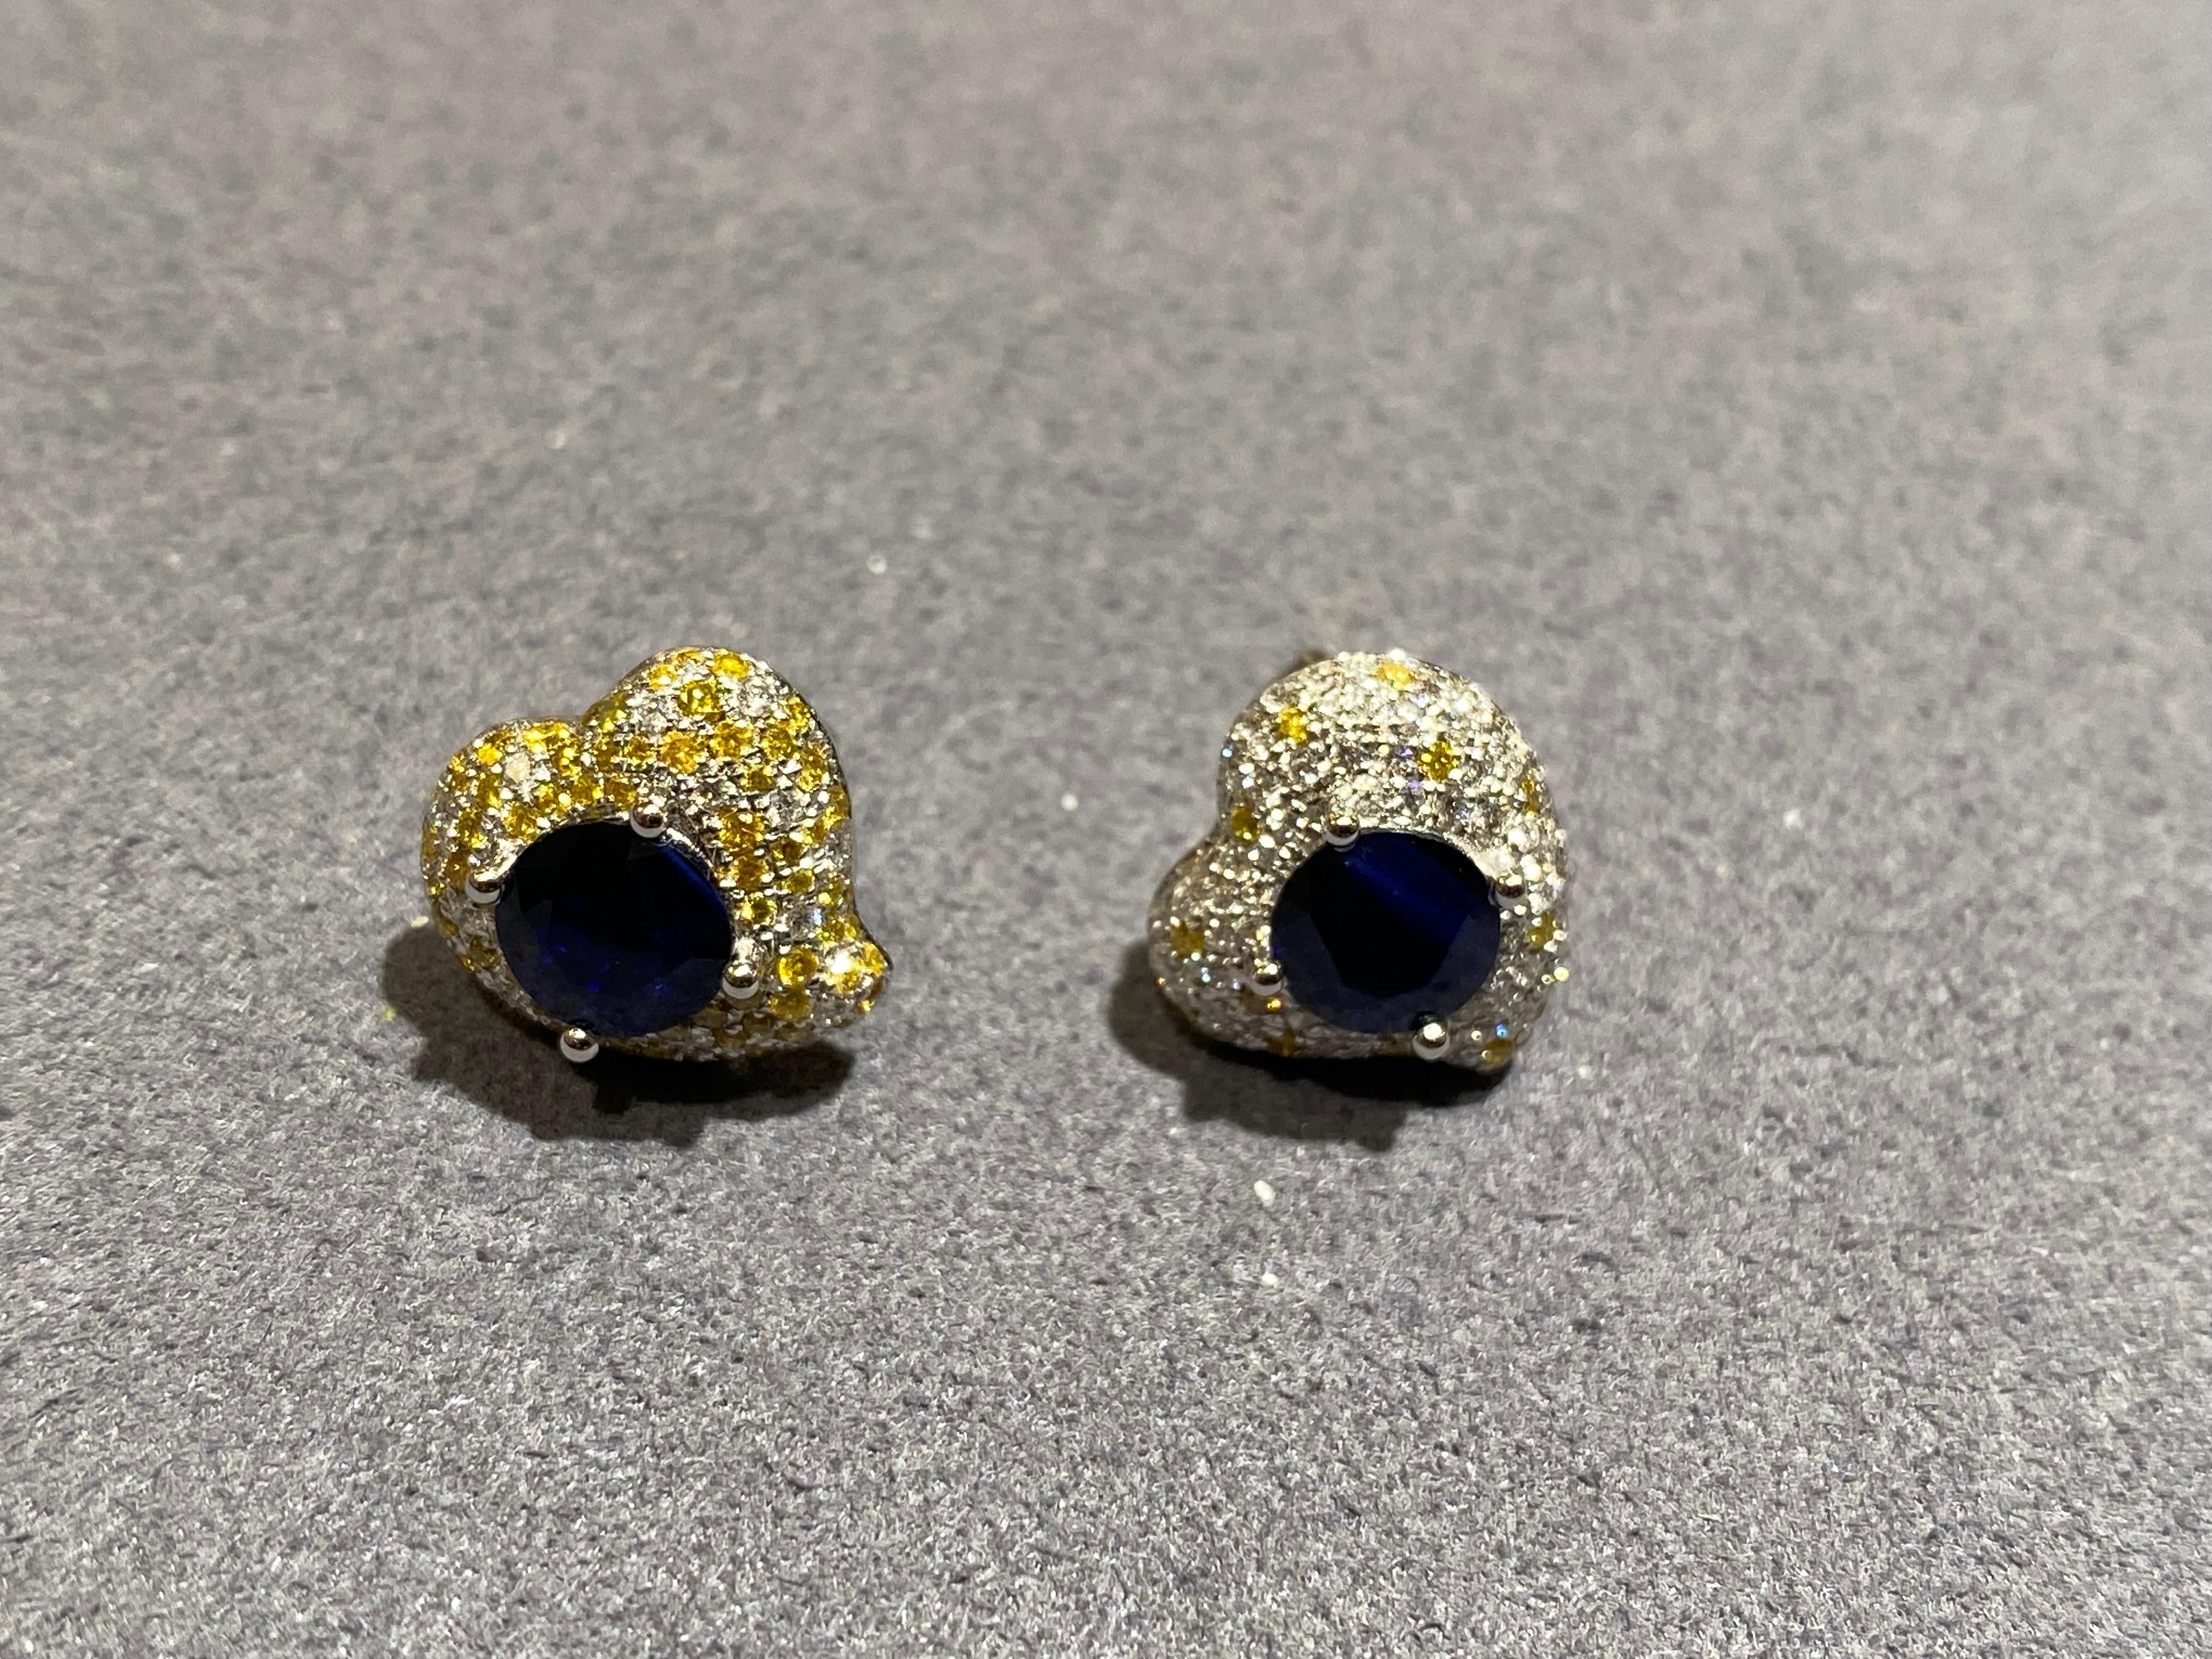 A pair of blue sapphire, yellow diamond and diamond earrings in 18k gold. It consists of 2 round brilliant cut blue sapphire set in heart shape diamond pave motif. The heart shape earring is mirror image of each other. One side of the earring is